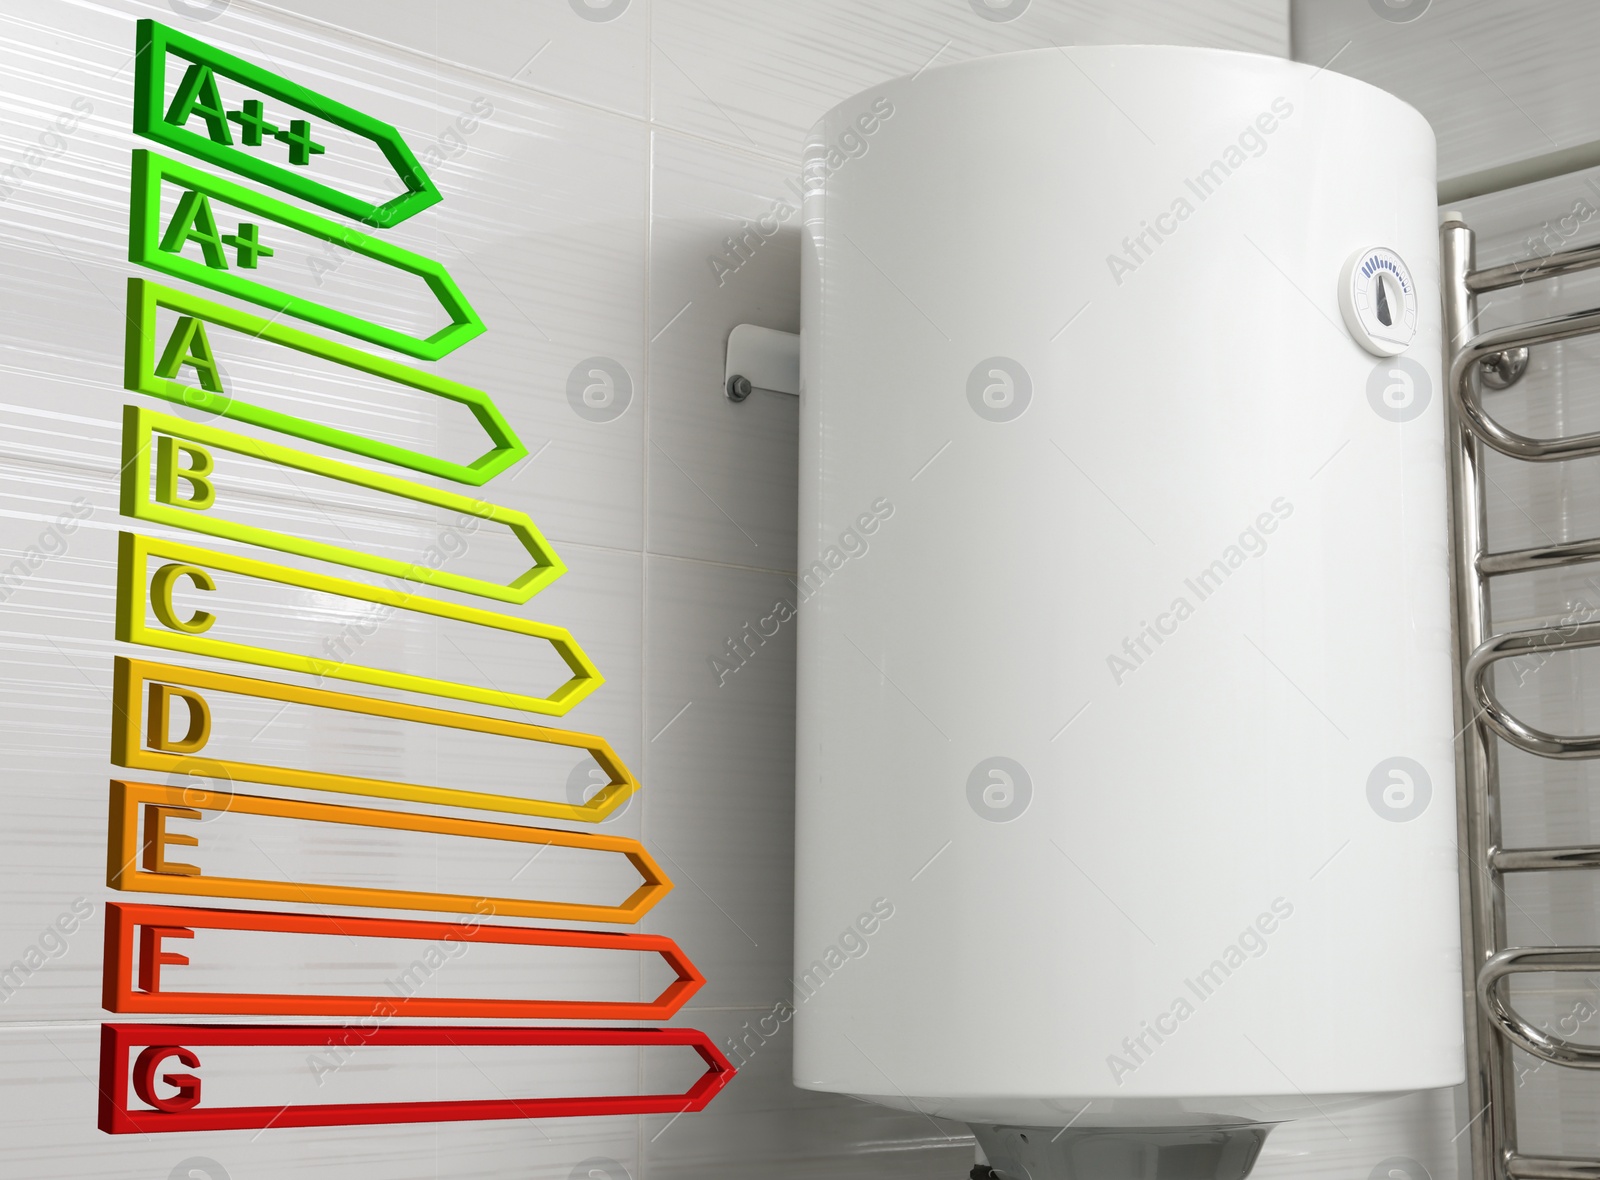 Image of Energy efficiency chart and electric boiler indoors